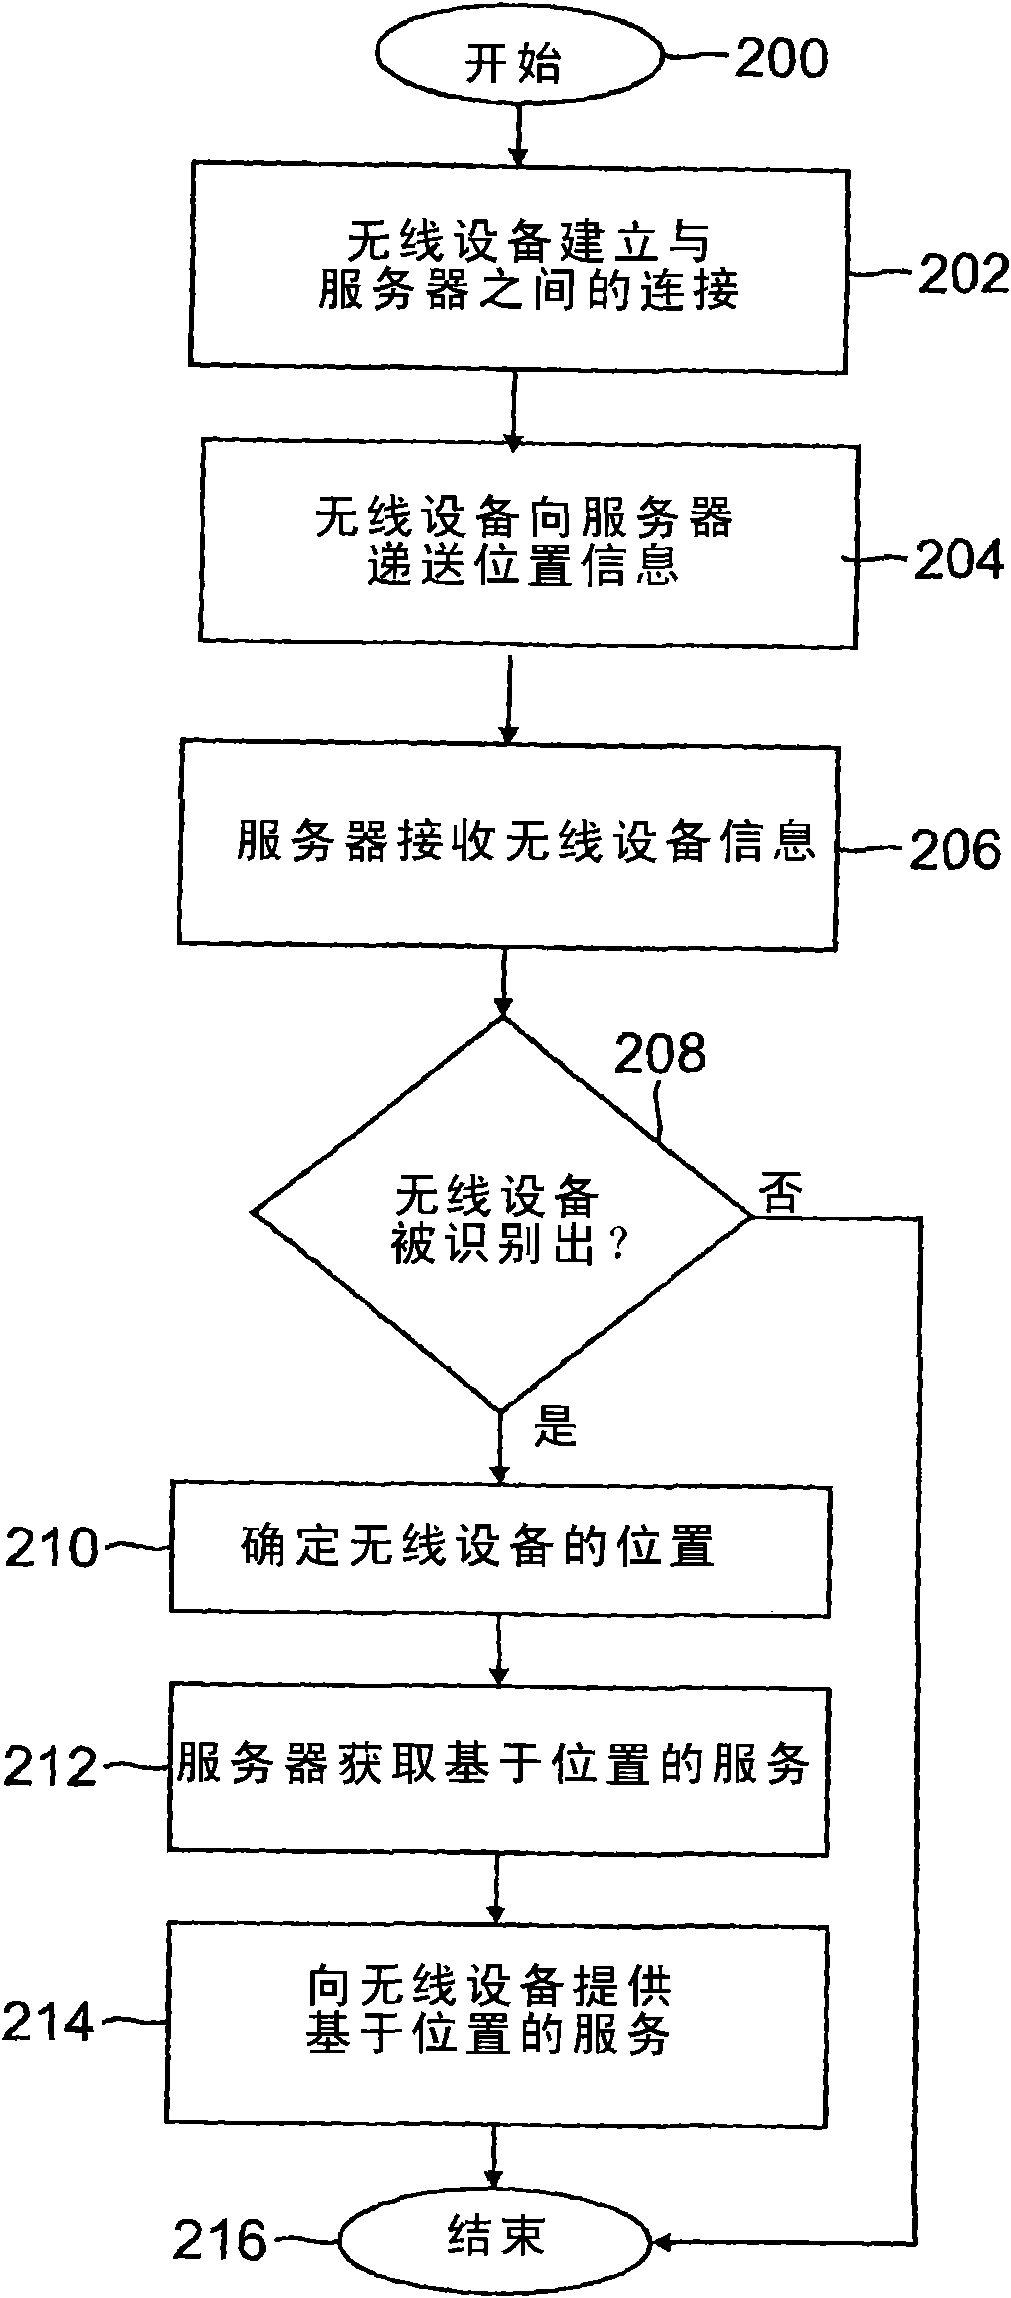 Power management system and method for mobile applications using location based services